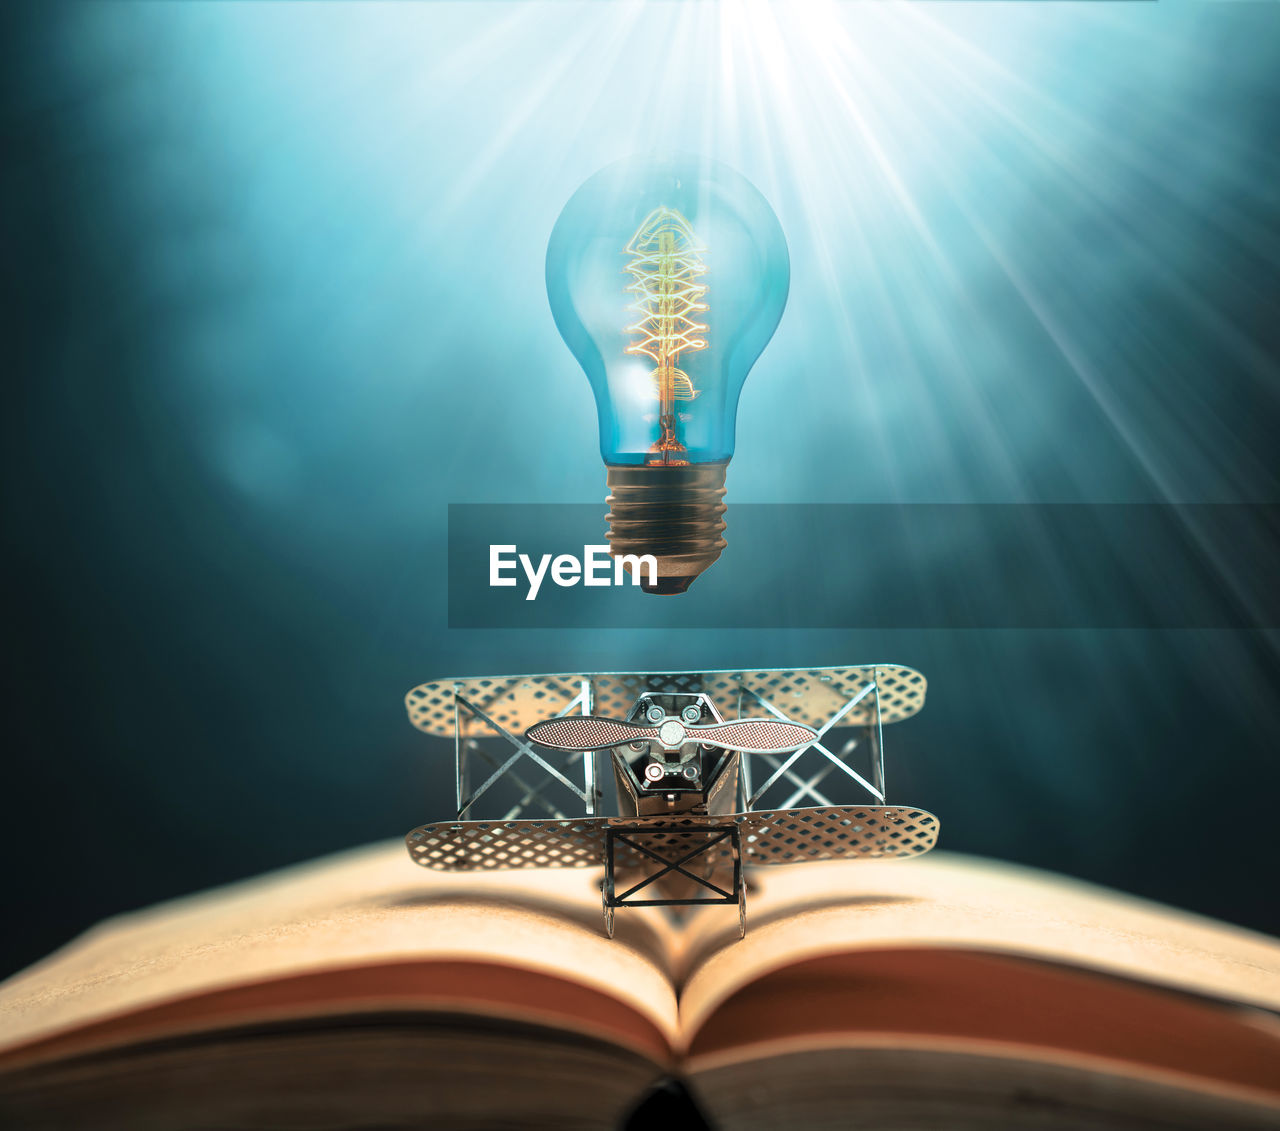 Digital composite image of illuminated light bulb over model airplane and book